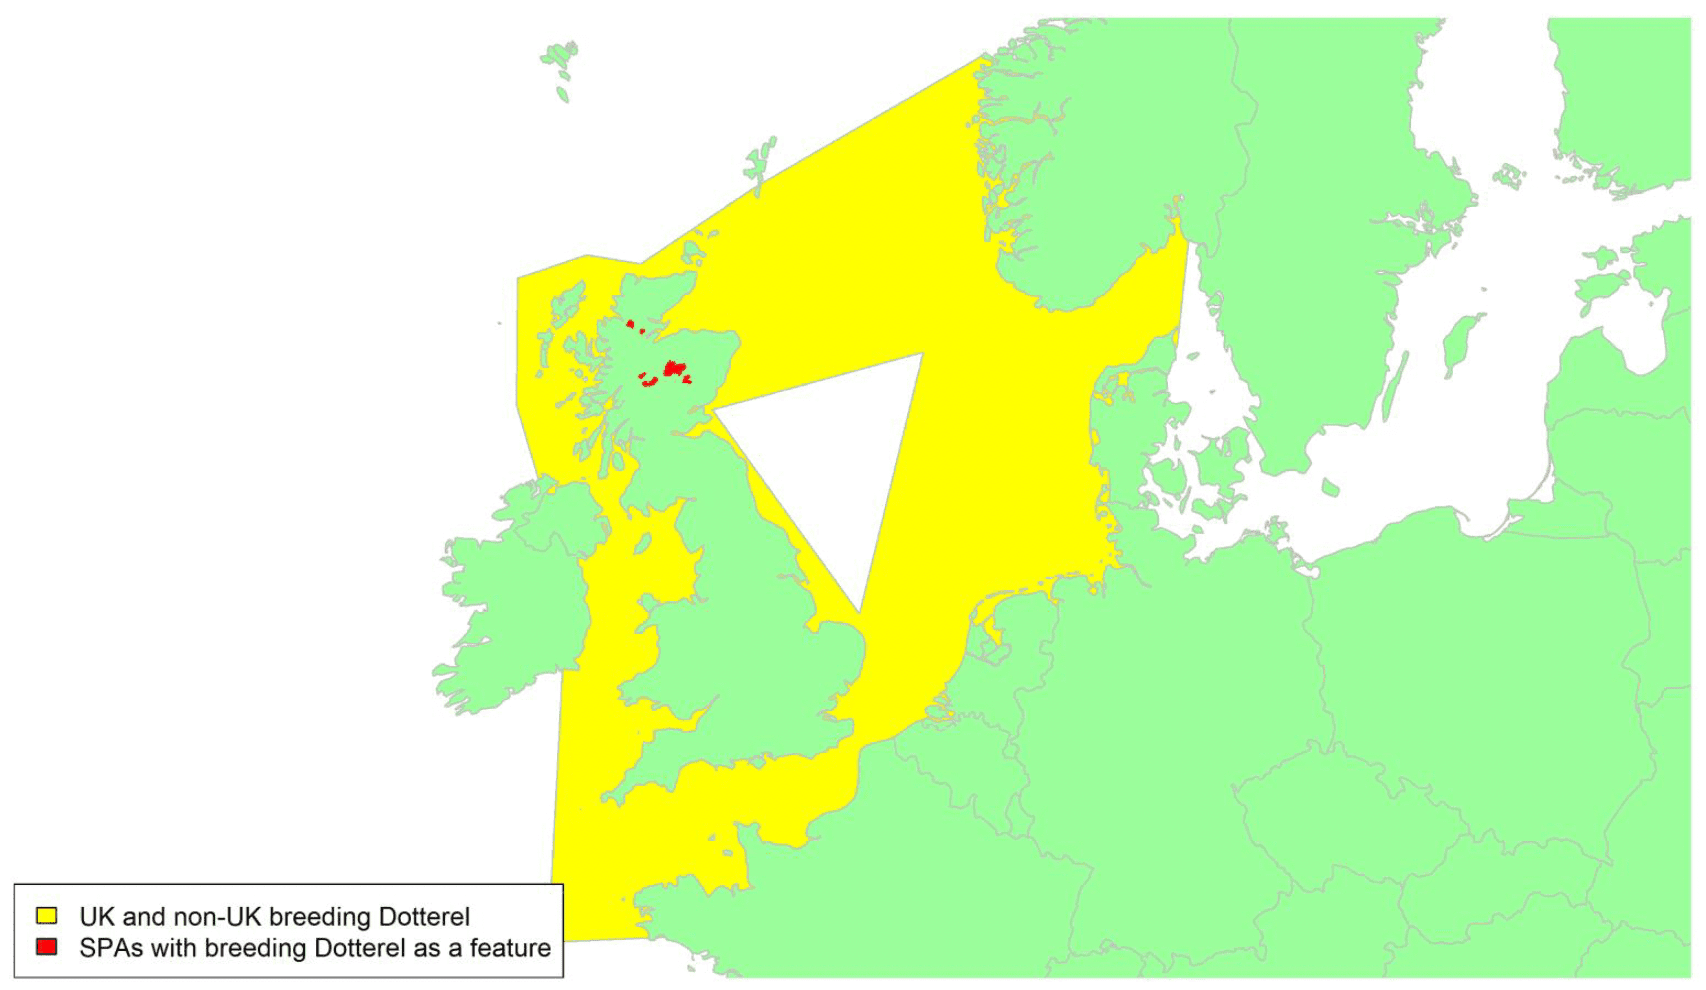 Map of North West Europe showing migratory routes and SPAs within the UK for Dotterel as described in the text below.